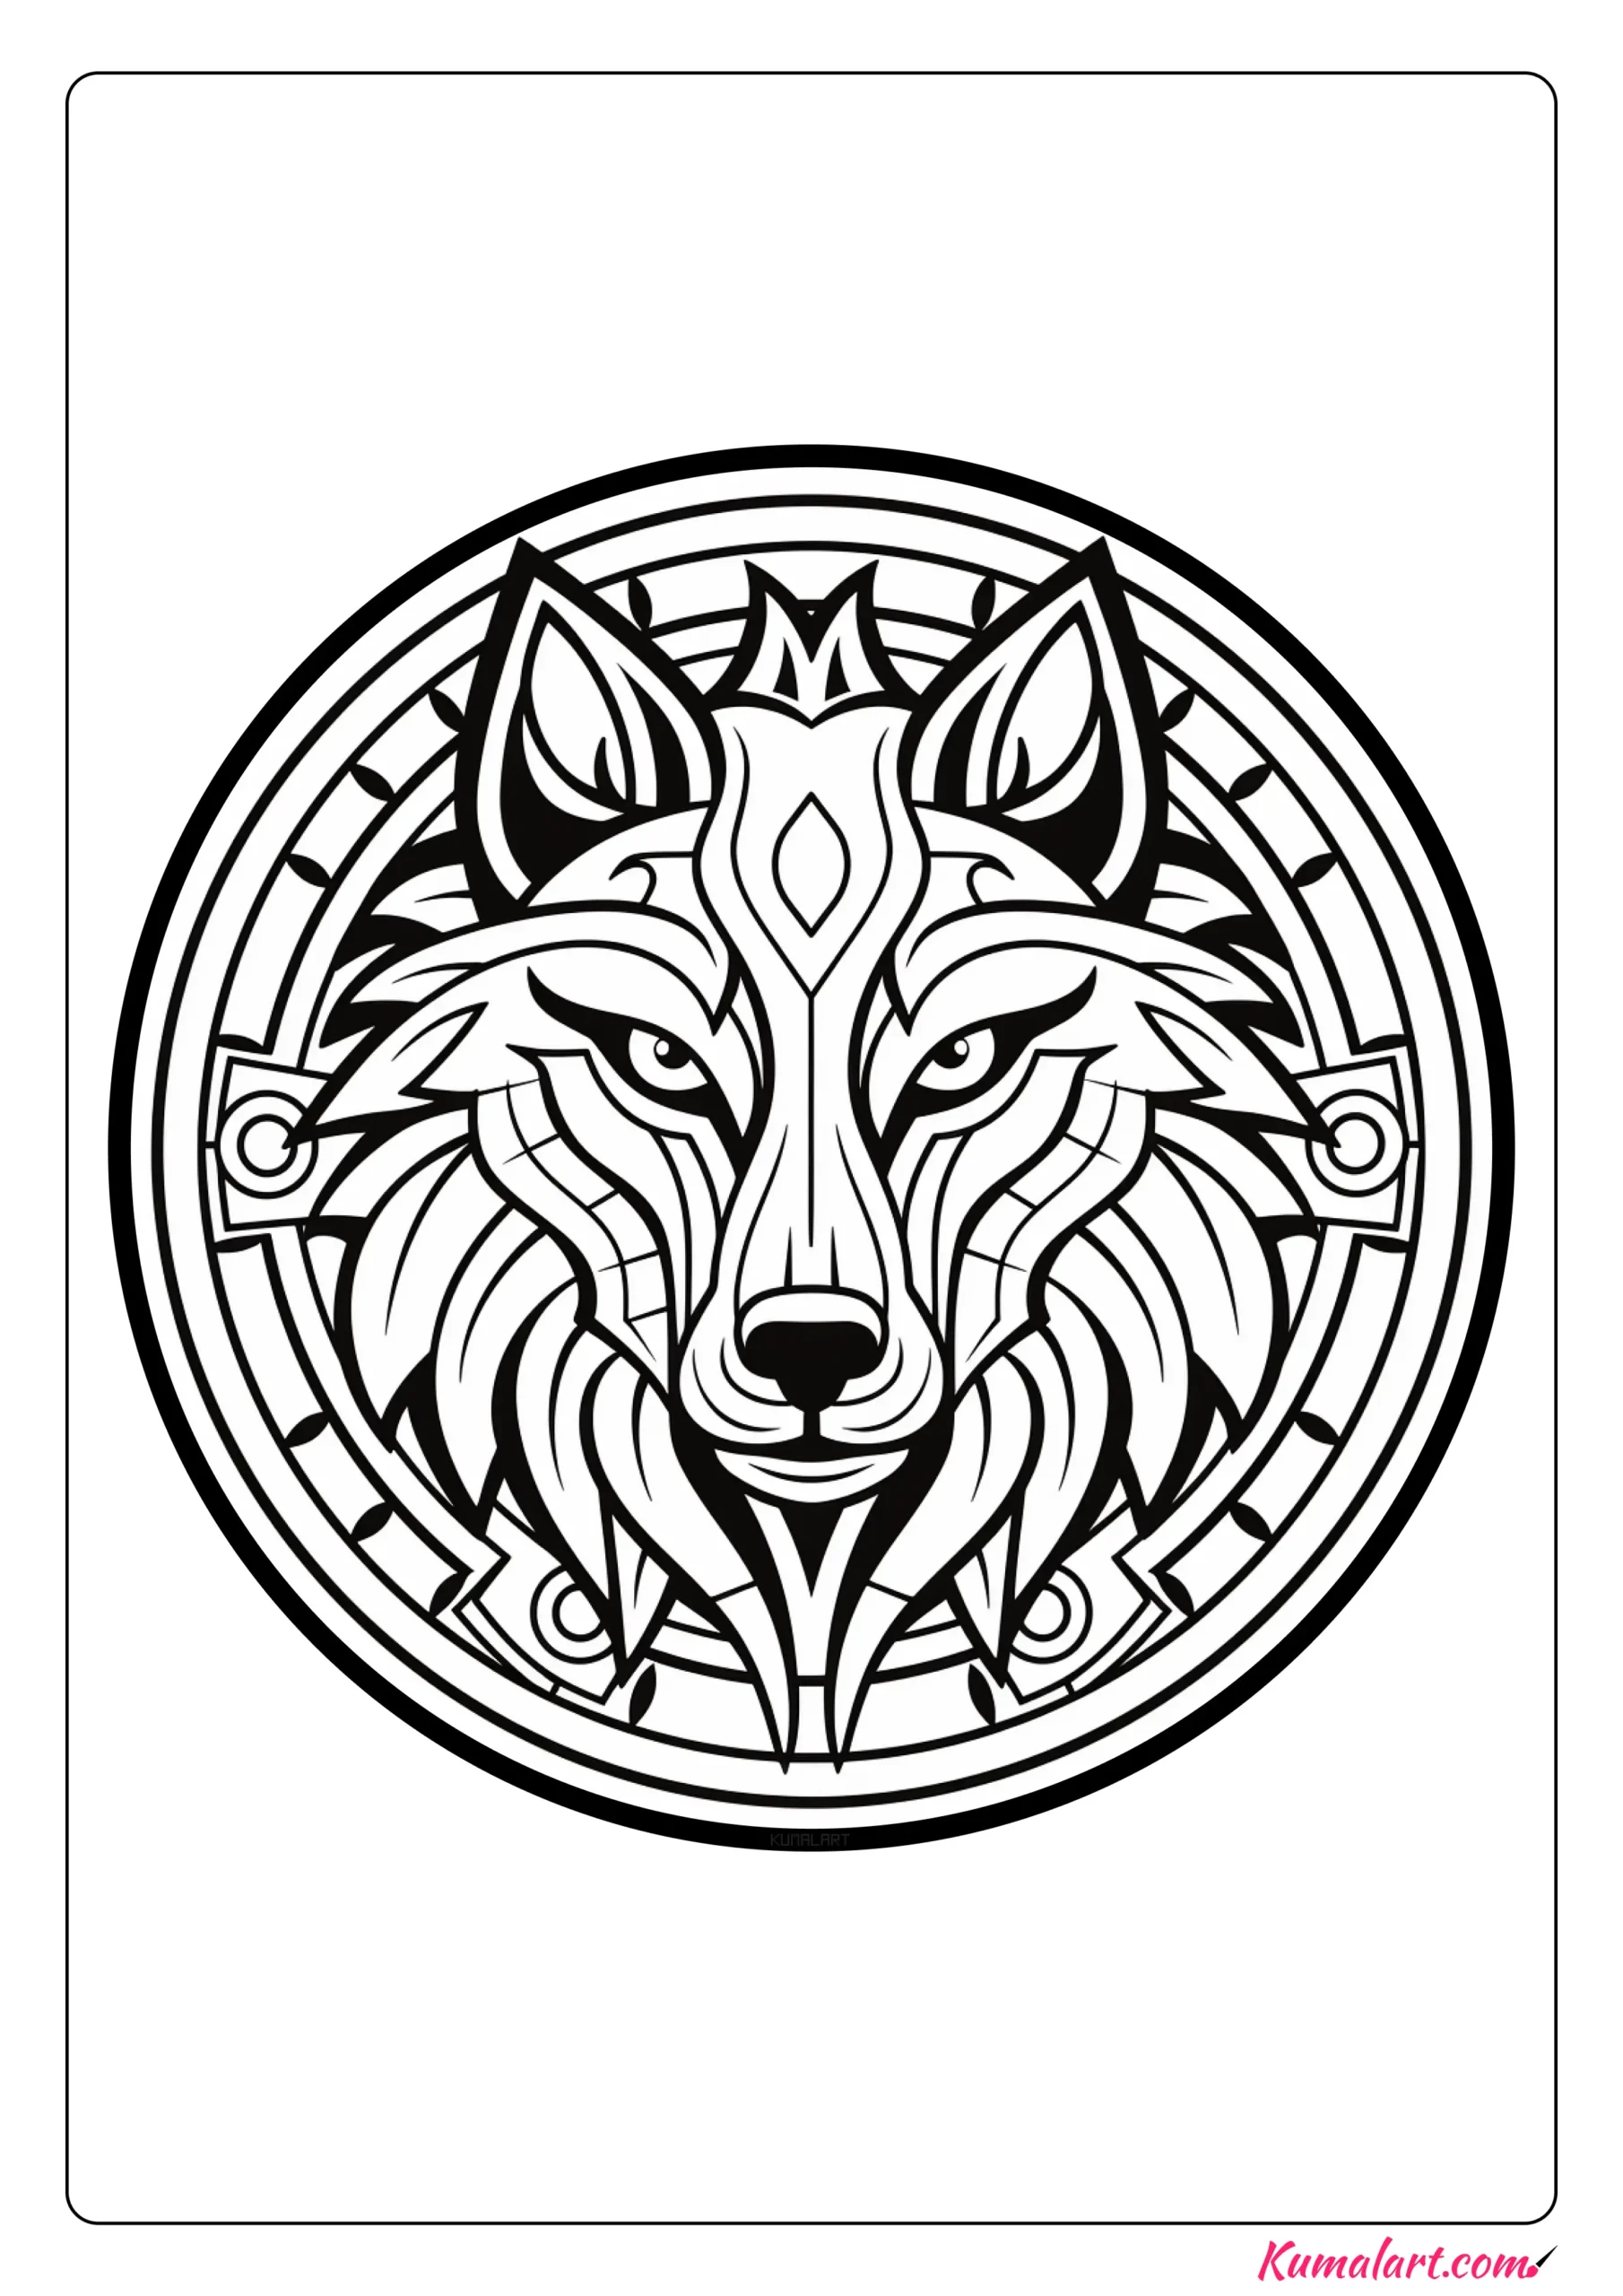 Zara the Wolf Coloring Page